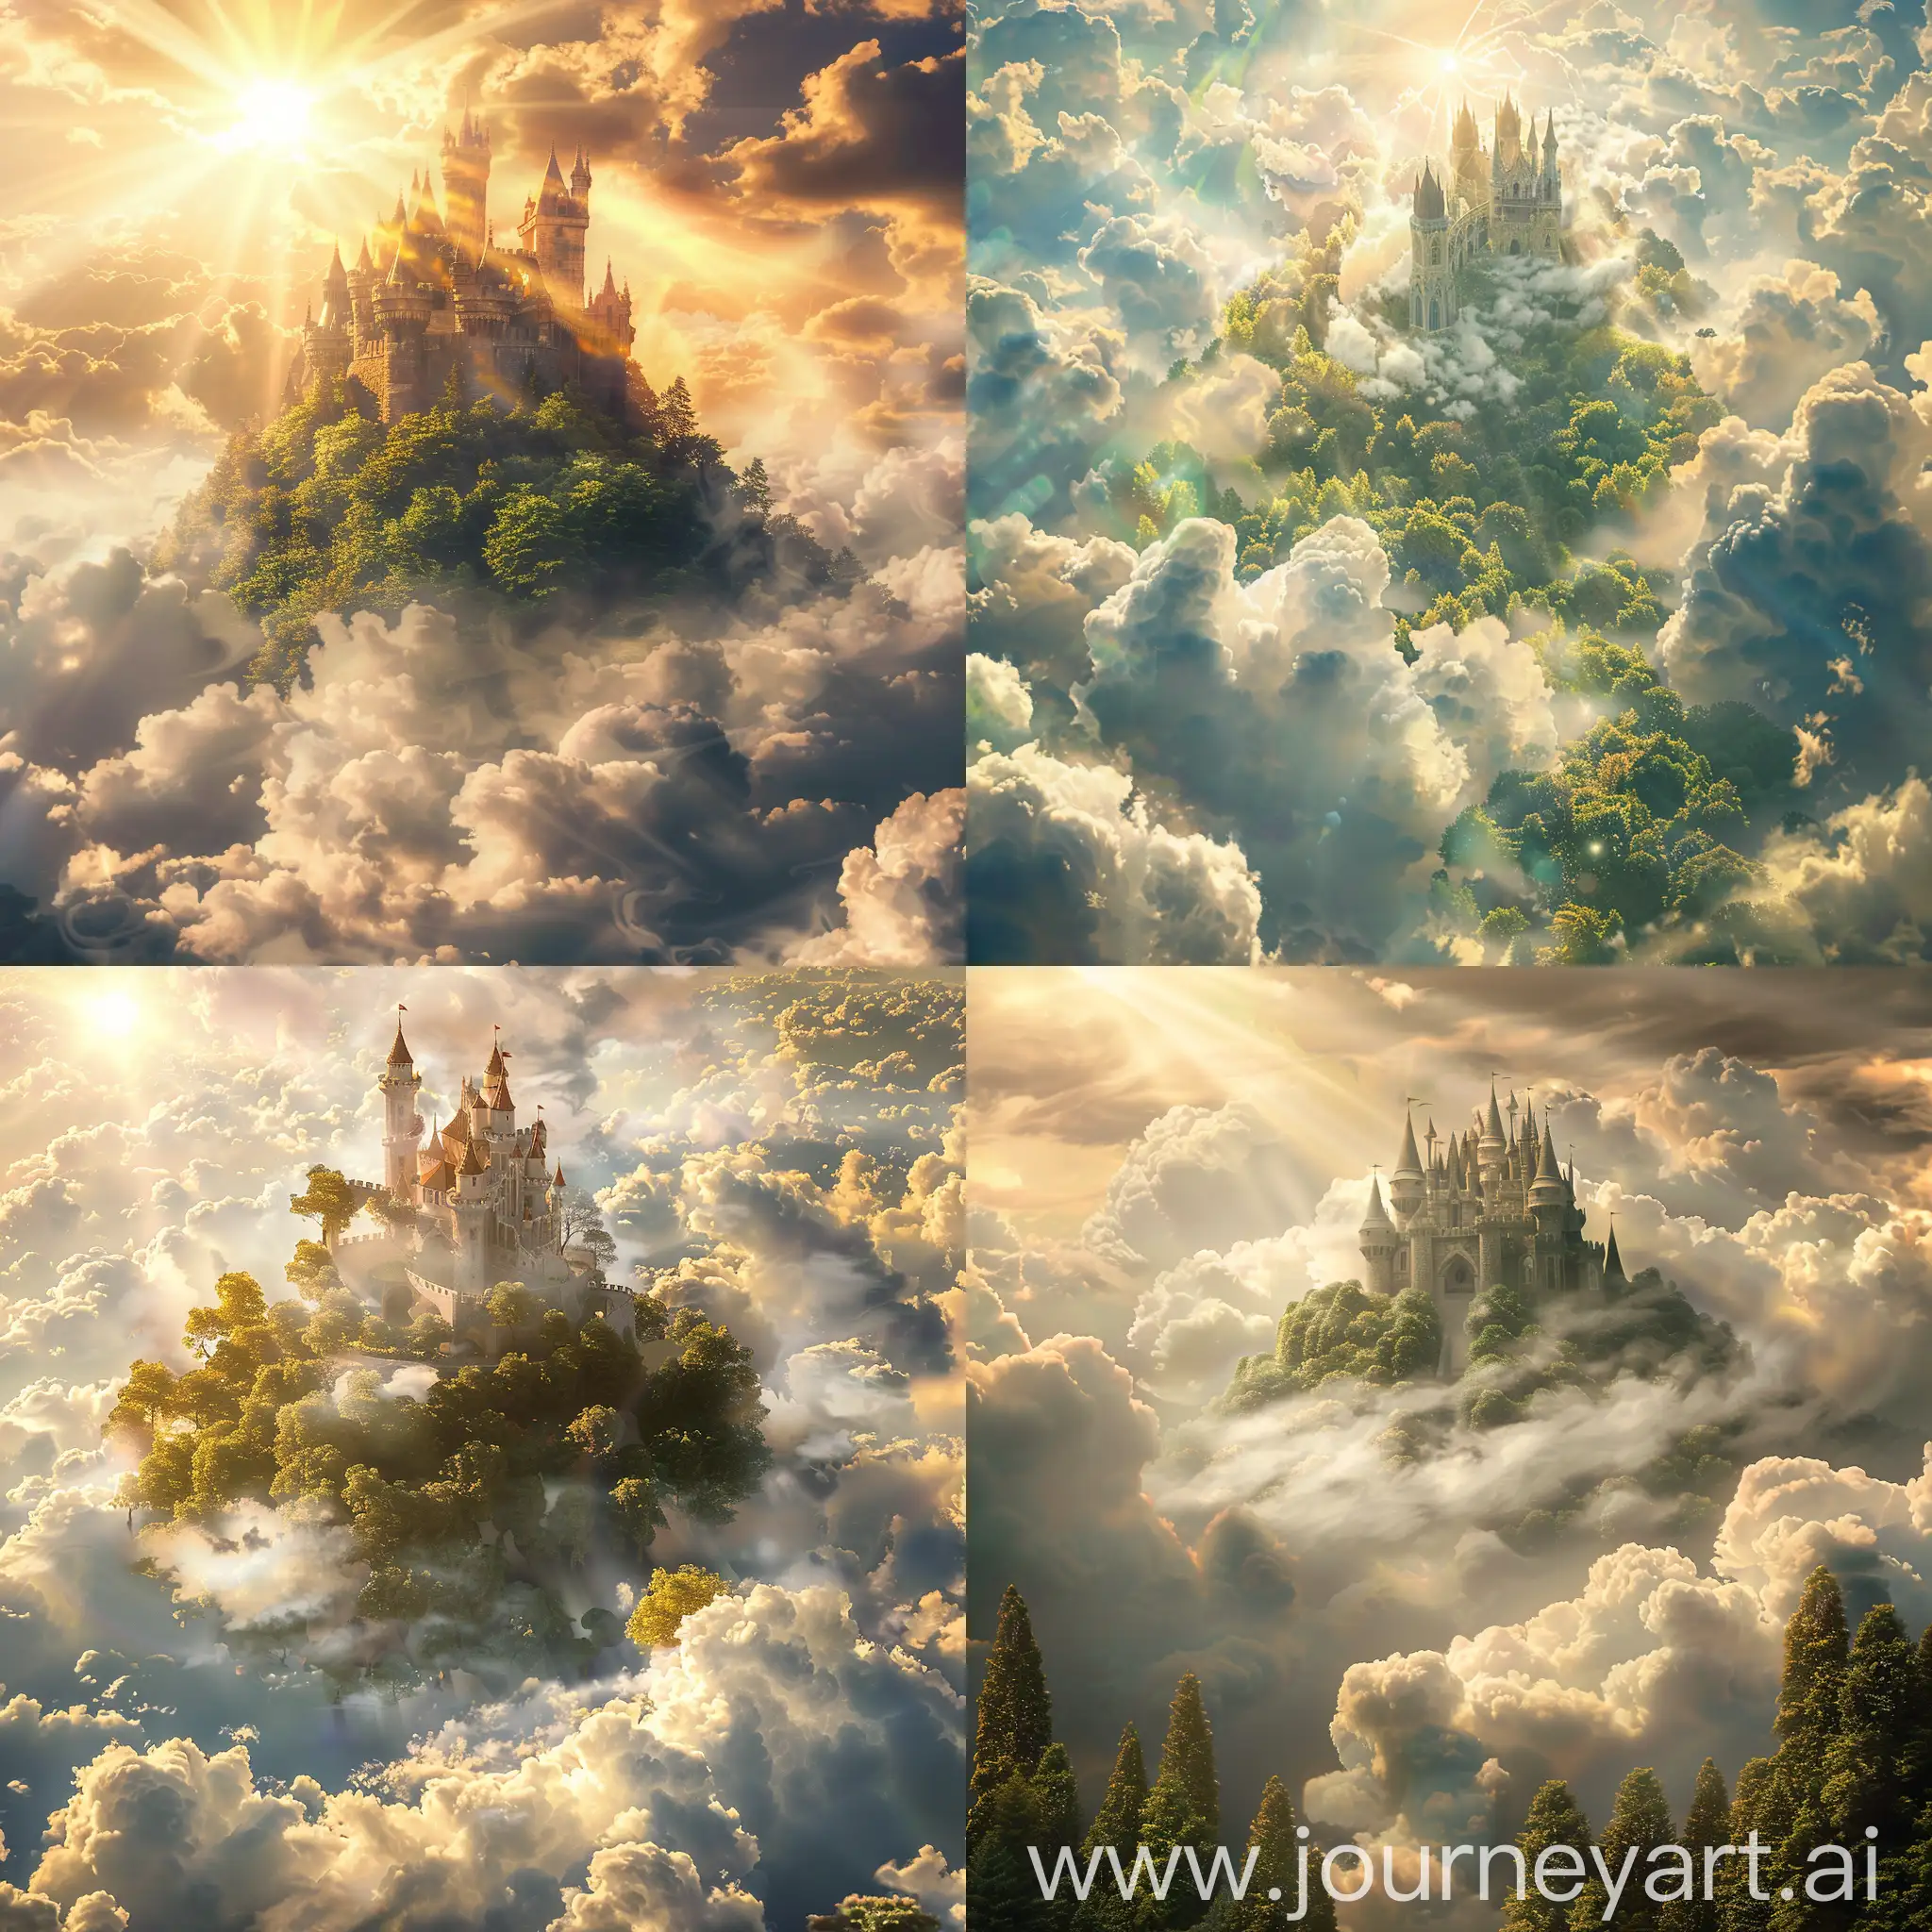 Hyper-Realistic-Castle-in-the-Clouds-with-Trees-on-a-Windy-Day